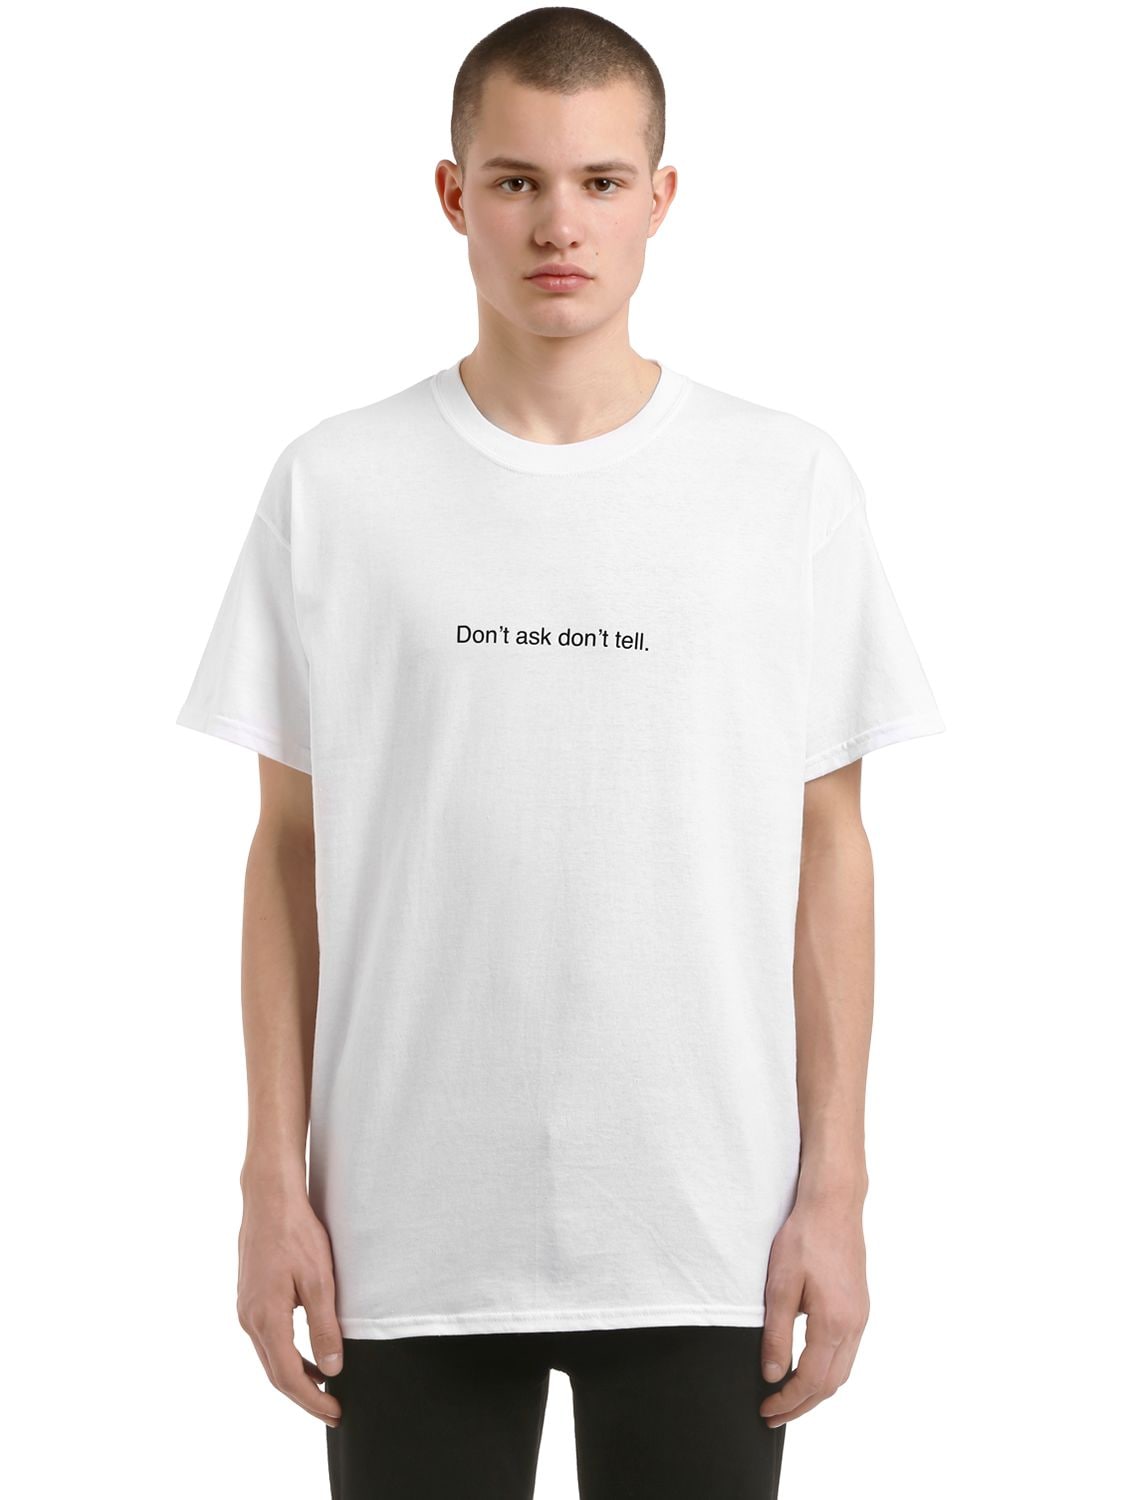 Famt - Fuck Art Make Tees Don't Ask, Don't Tell Cotton T-shirt In White